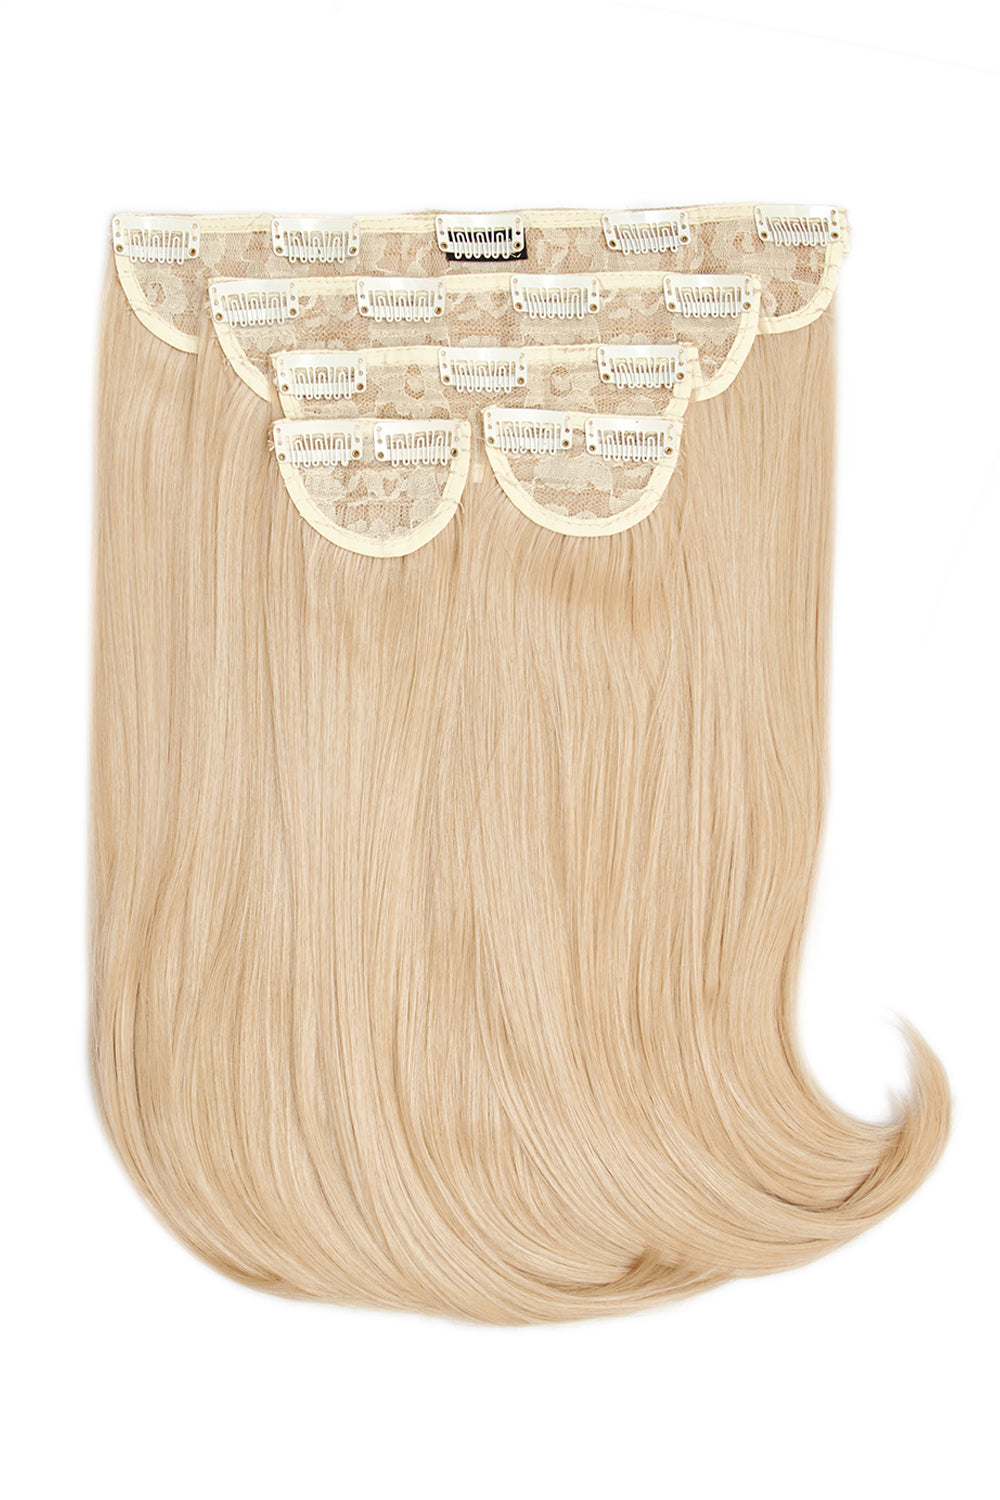 Super Thick 16" 5 Piece Curve Clip in Hair Extensions + Hair Care Bundle - Champagne Blonde